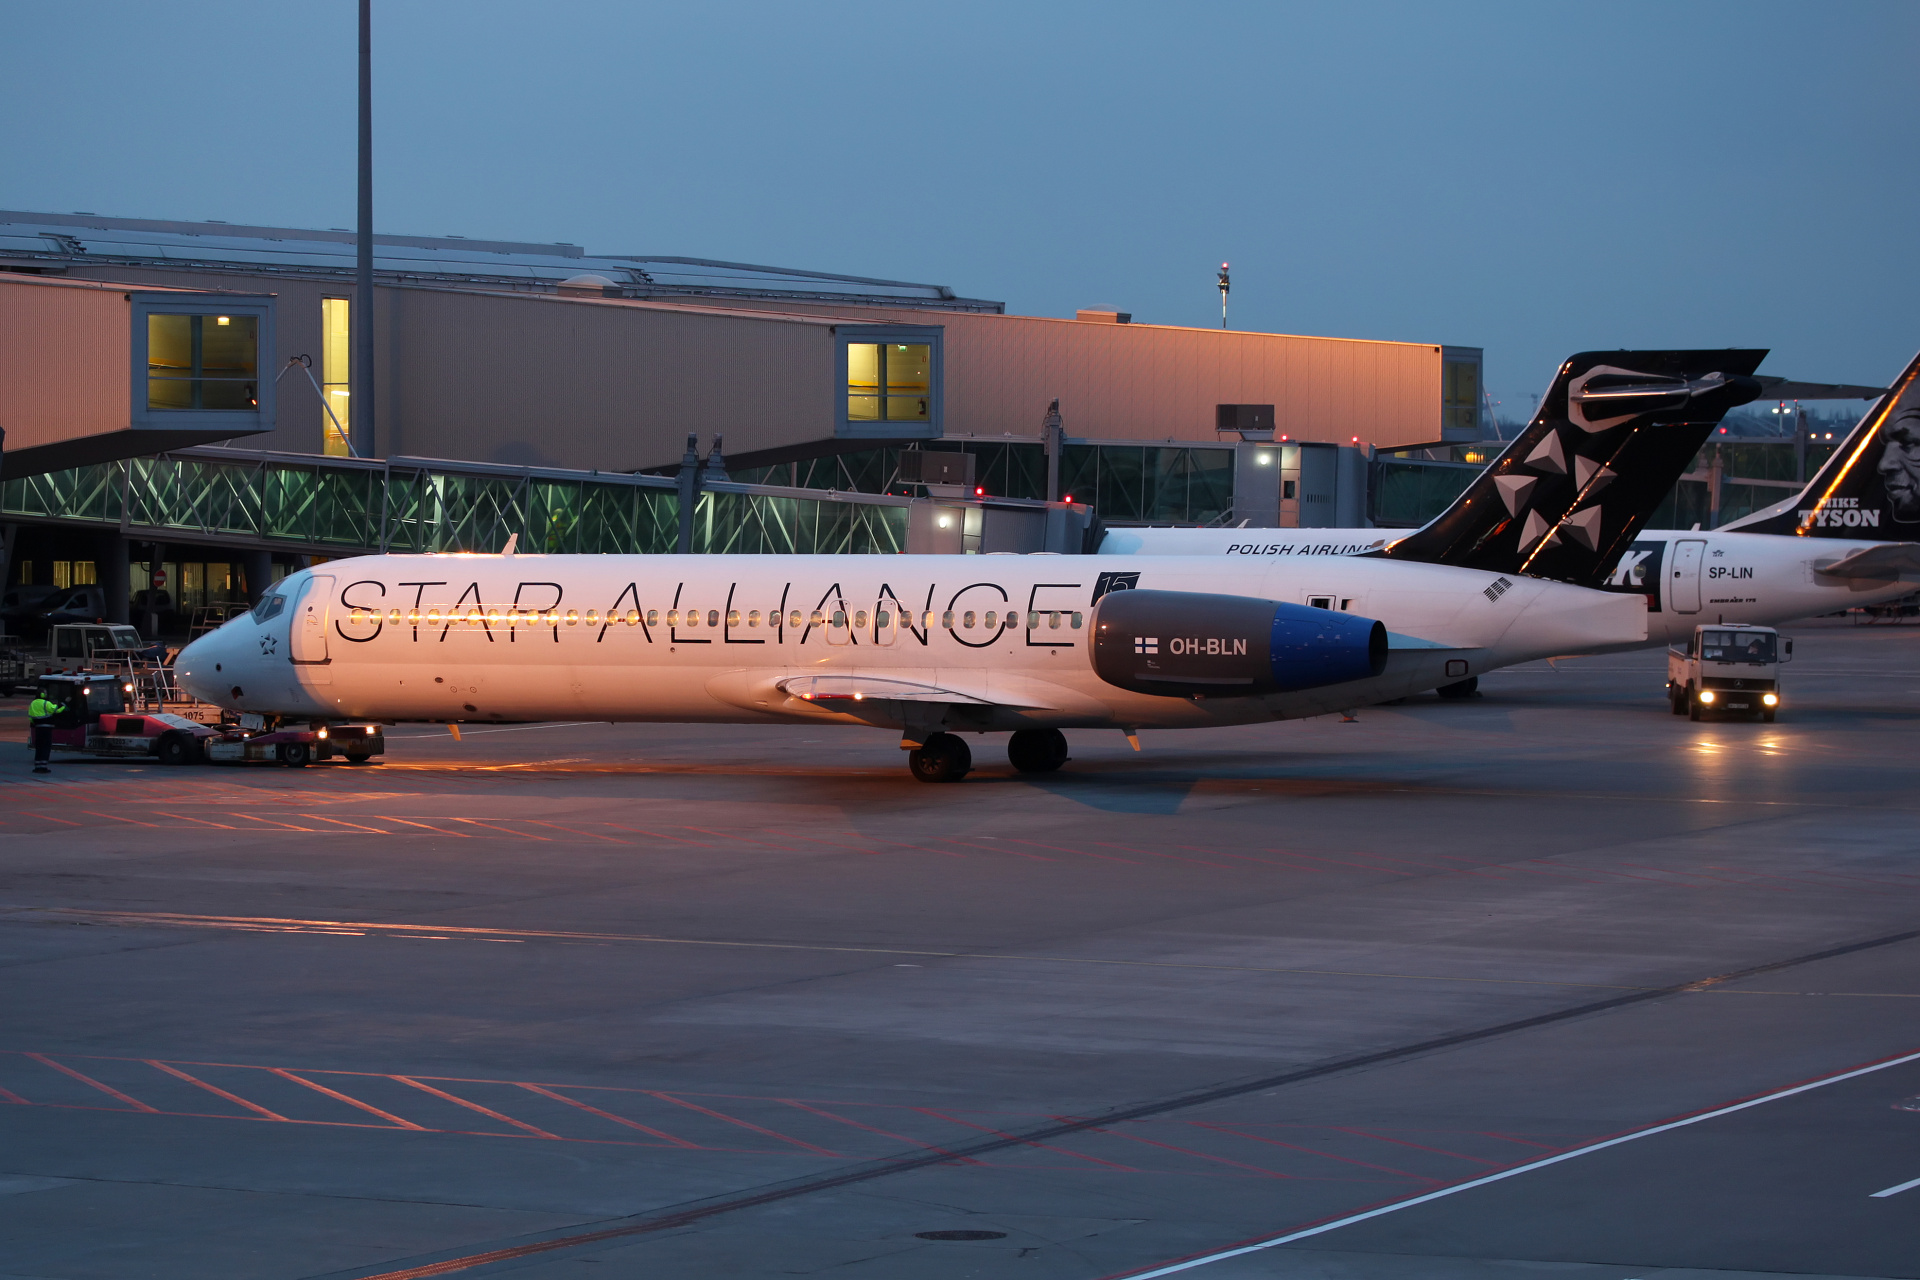 OH-BLN, Blue1 (Star Alliance livery) (Aircraft » EPWA Spotting » Boeing 717)